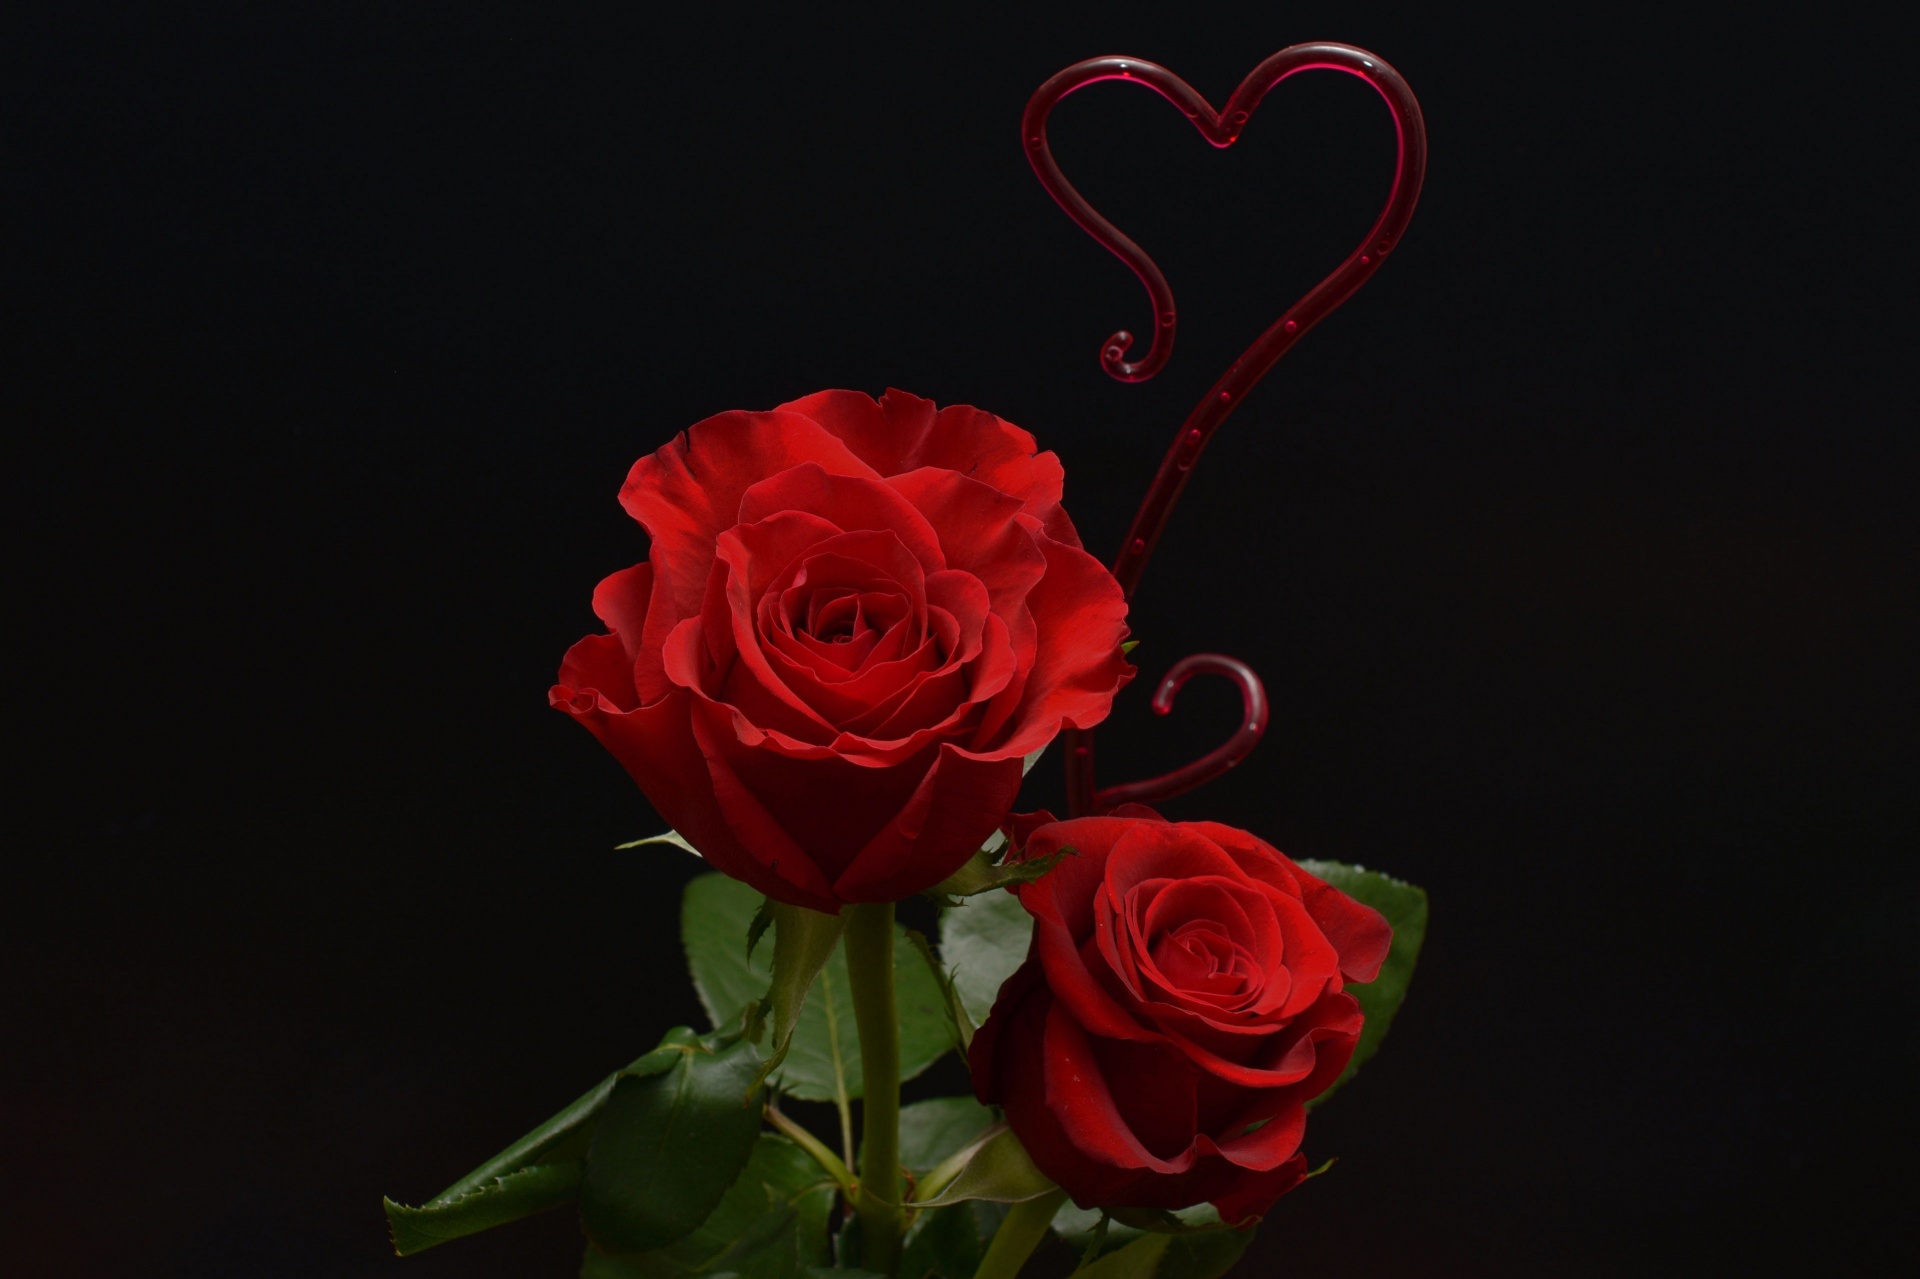 Red Rose, Love Passion